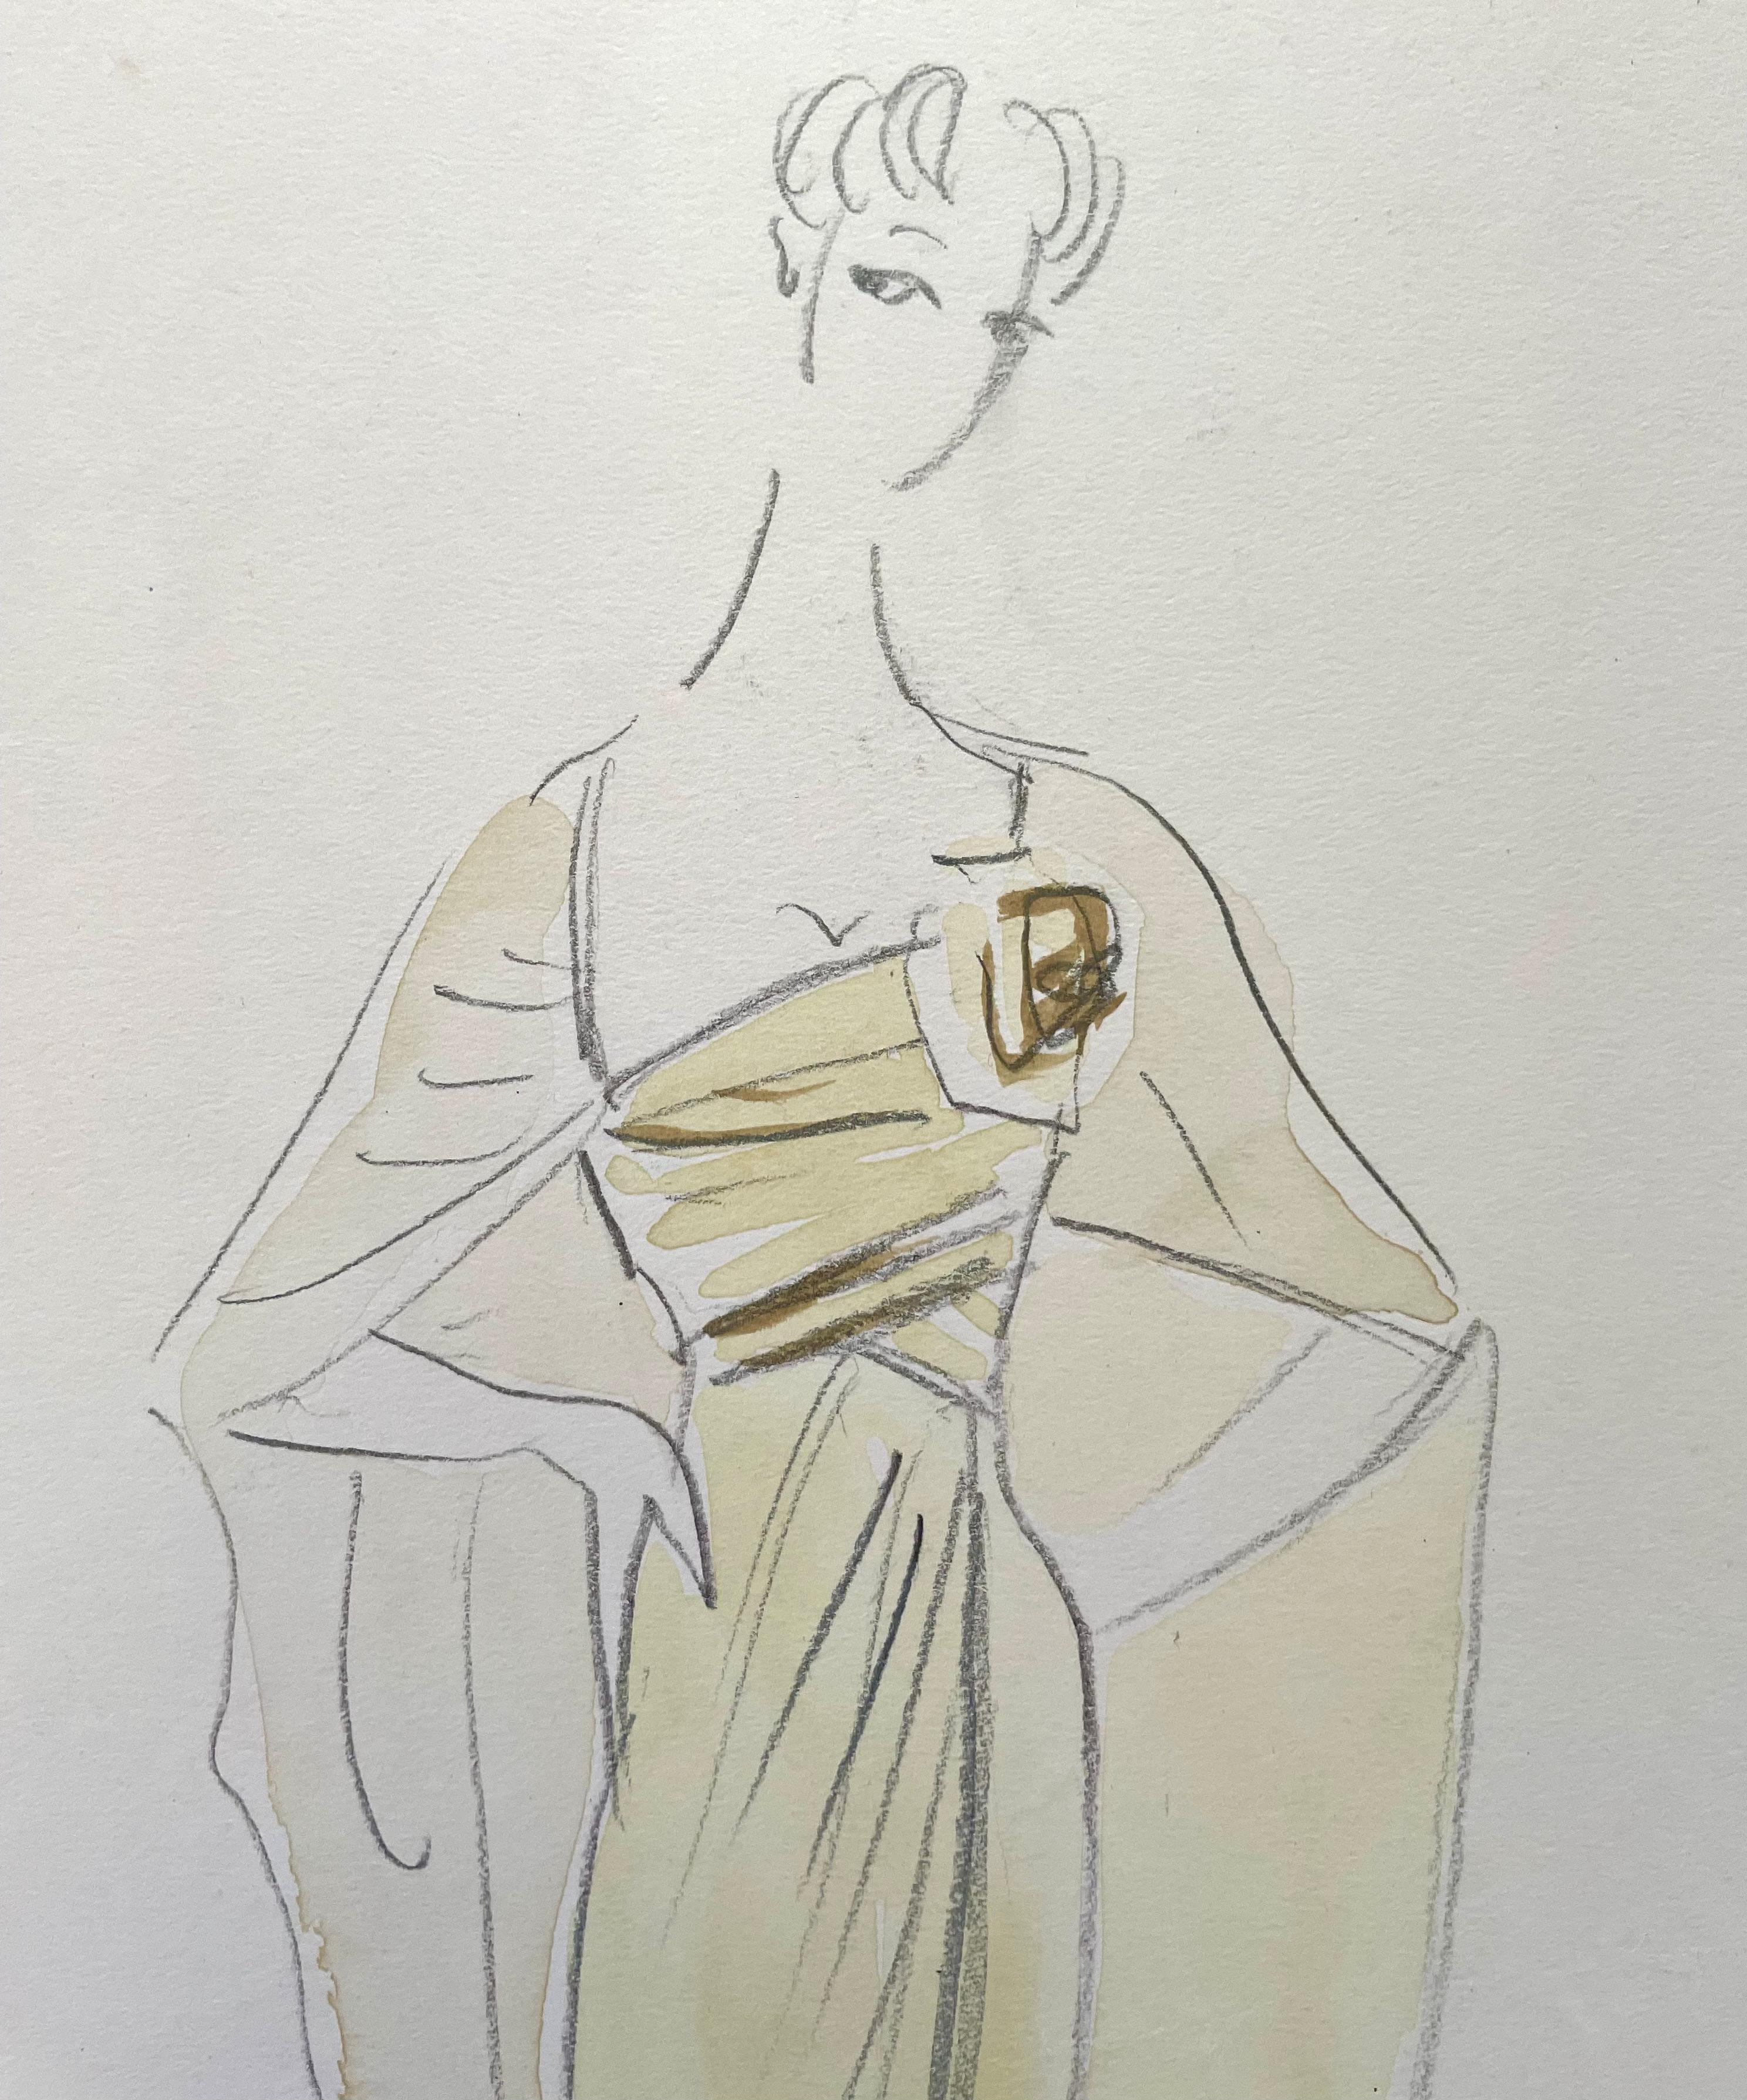 SIR CECIL BEATON, CBE
(1904-1980)

Design for Gown

Watercolour and pencil
Framed

39 by 25.5 cm., 15 ¼ by 10 in.
(mount size 61 by 46 cm., 24 by 18 in.)

Provenance:
The artist’s studio sale;
Private collection.

Cecil Walter Hardy Beaton was a